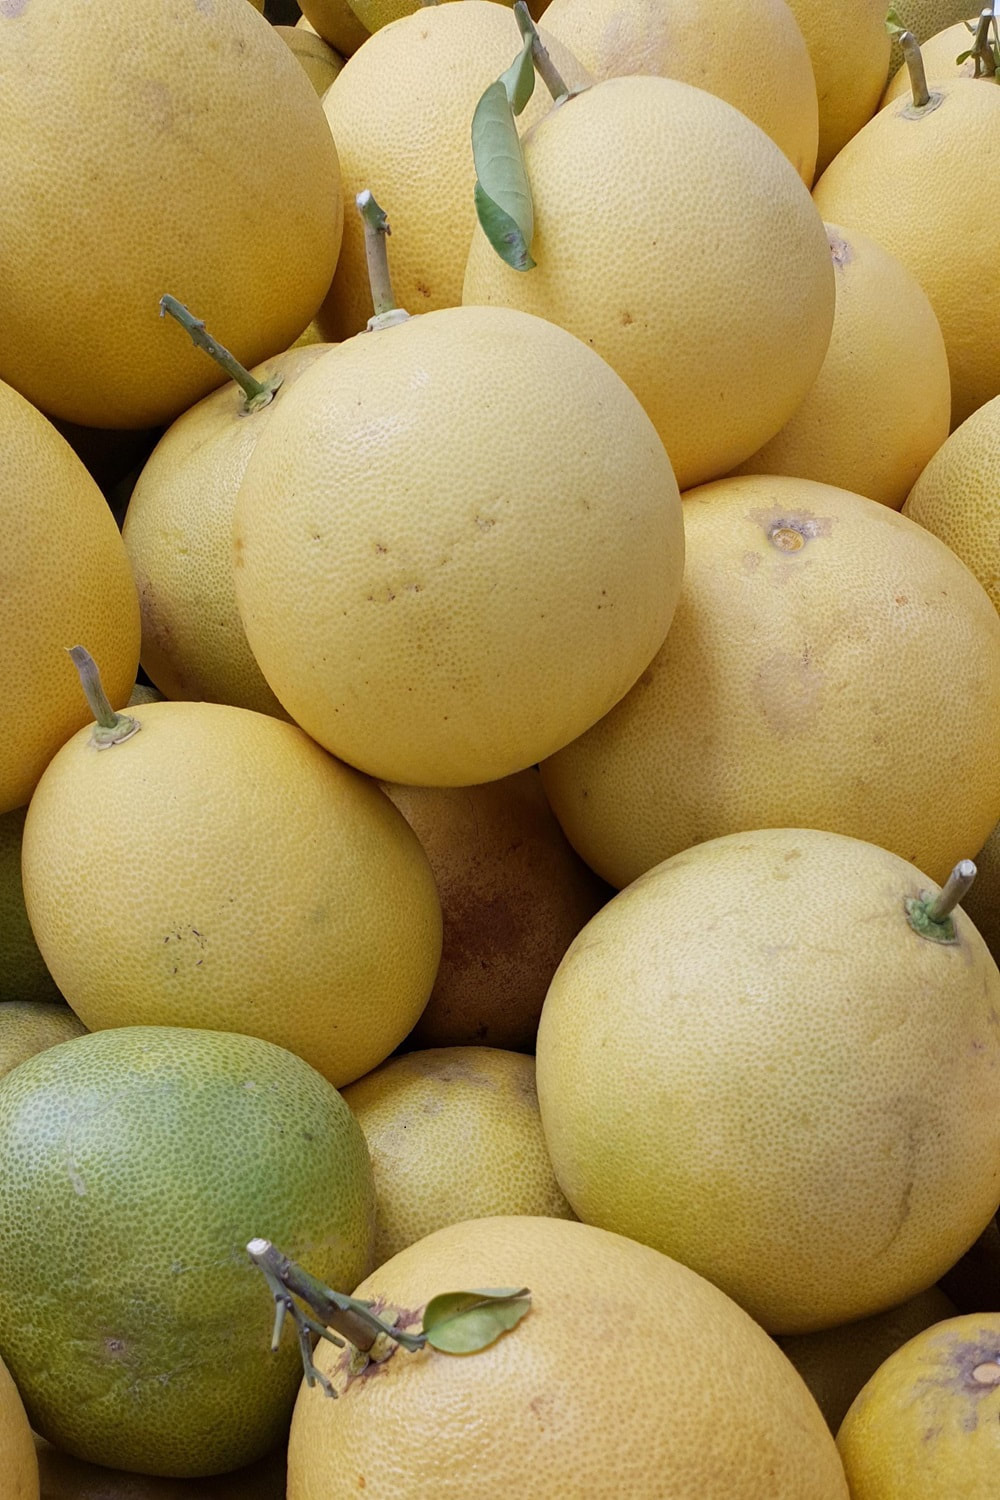 Yellow Pomelo. Photo credits M. Majed from Pixabay.